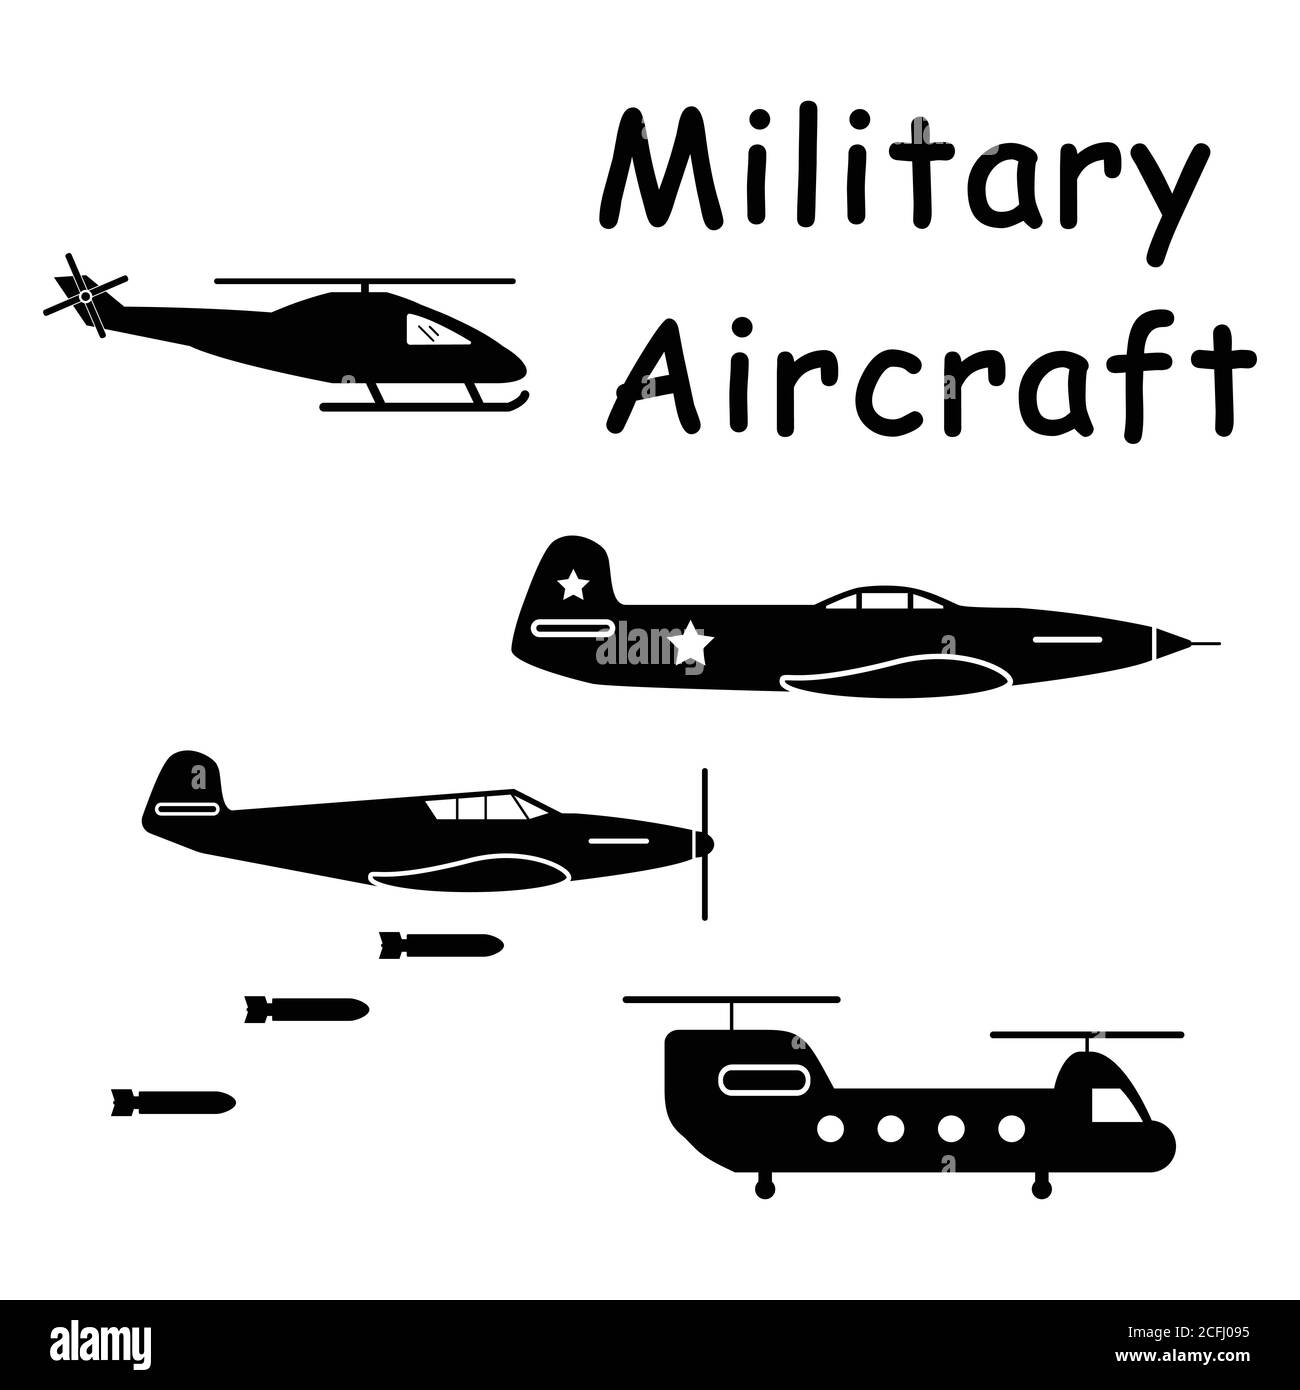 Military Aircraft Planes Helicopter. Pictogram depicting aircraft machines used in aerial warfare such as fighter jets and helicopters. EPS Vector Stock Vector